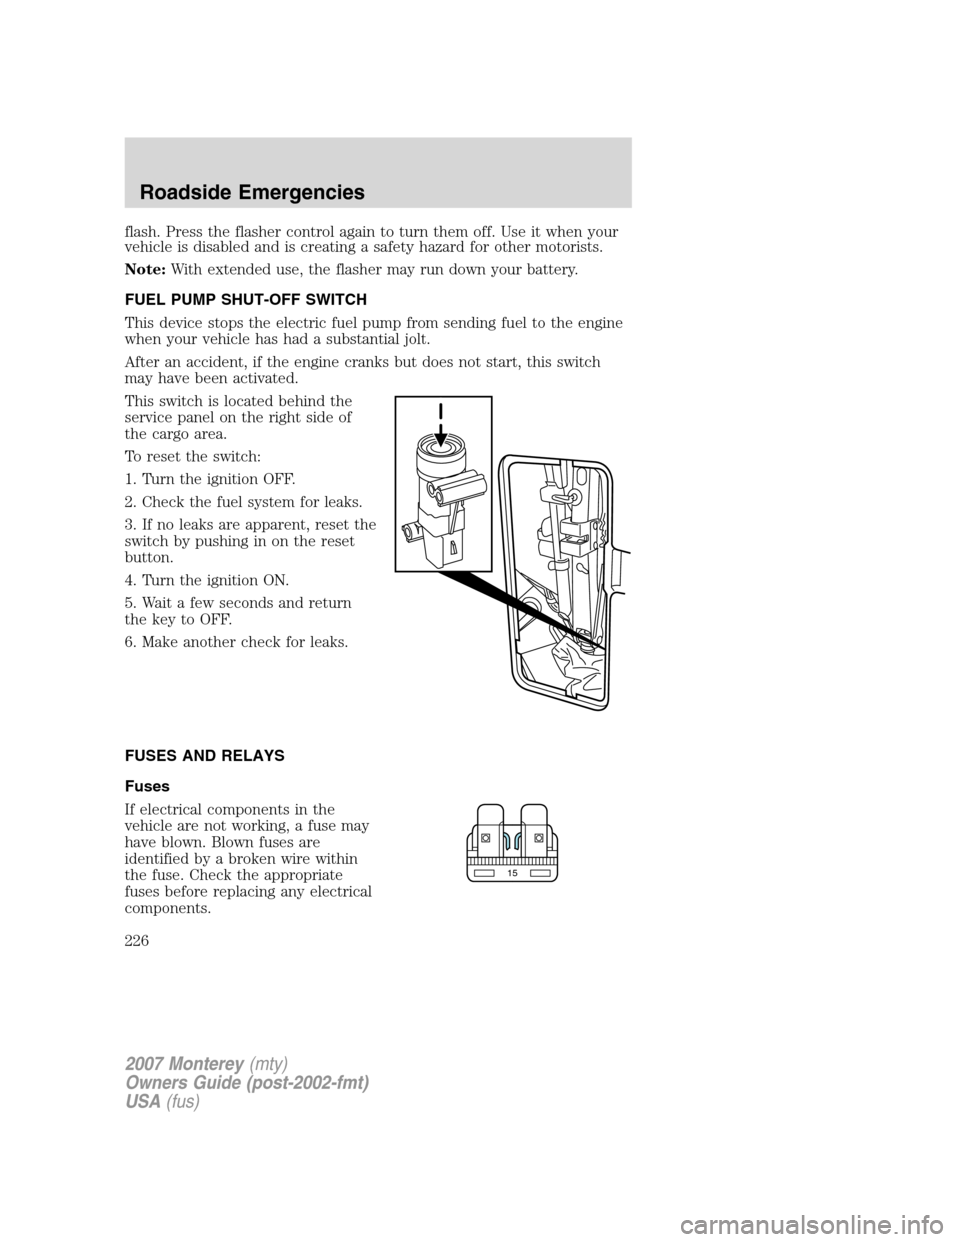 Mercury Monterey 2007  Owners Manuals flash. Press the flasher control again to turn them off. Use it when your
vehicle is disabled and is creating a safety hazard for other motorists.
Note:With extended use, the flasher may run down your